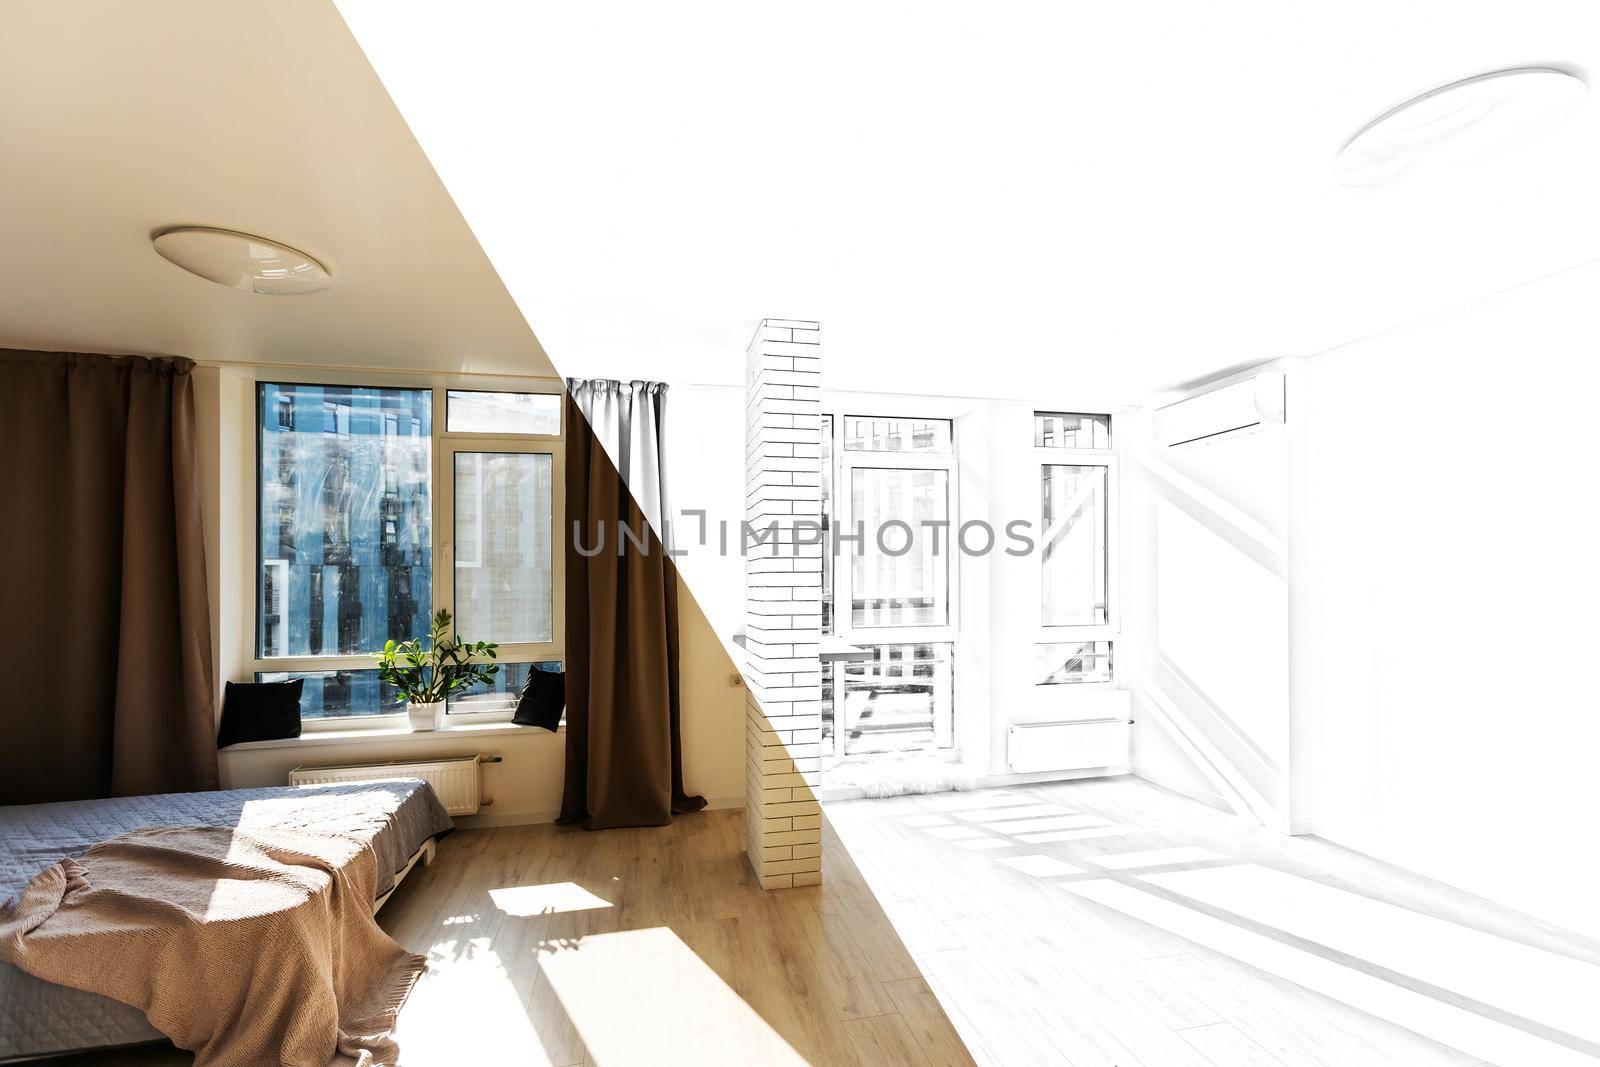 Before and after renovation modern office interior sketch. Repairs concept. by Andelov13